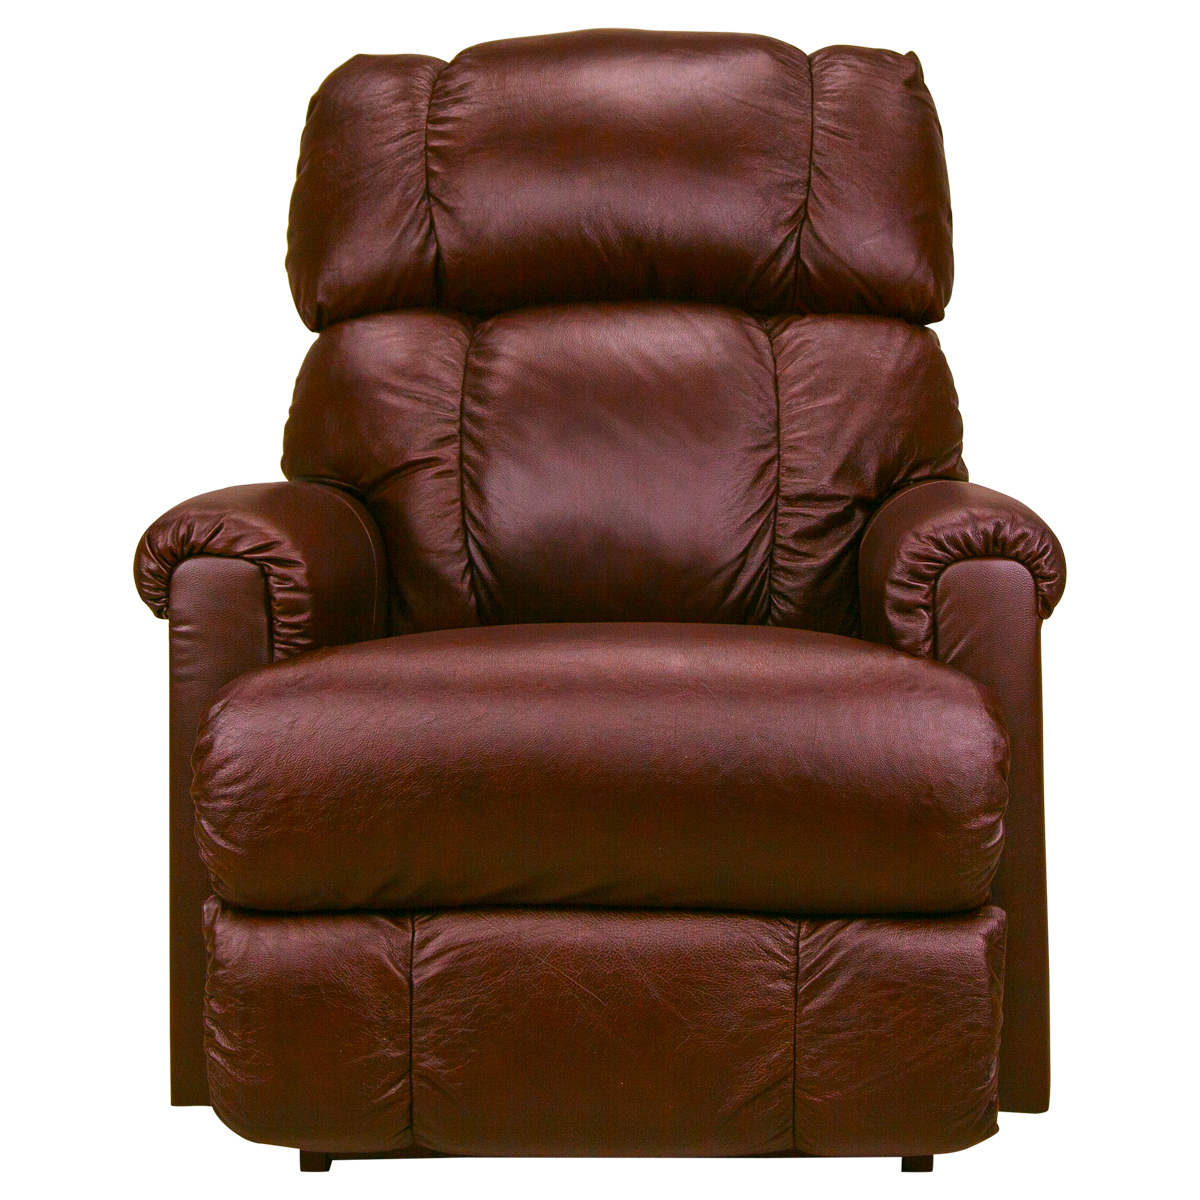 Picture of PINNACLE RECLINER WITH POWER HEADREST